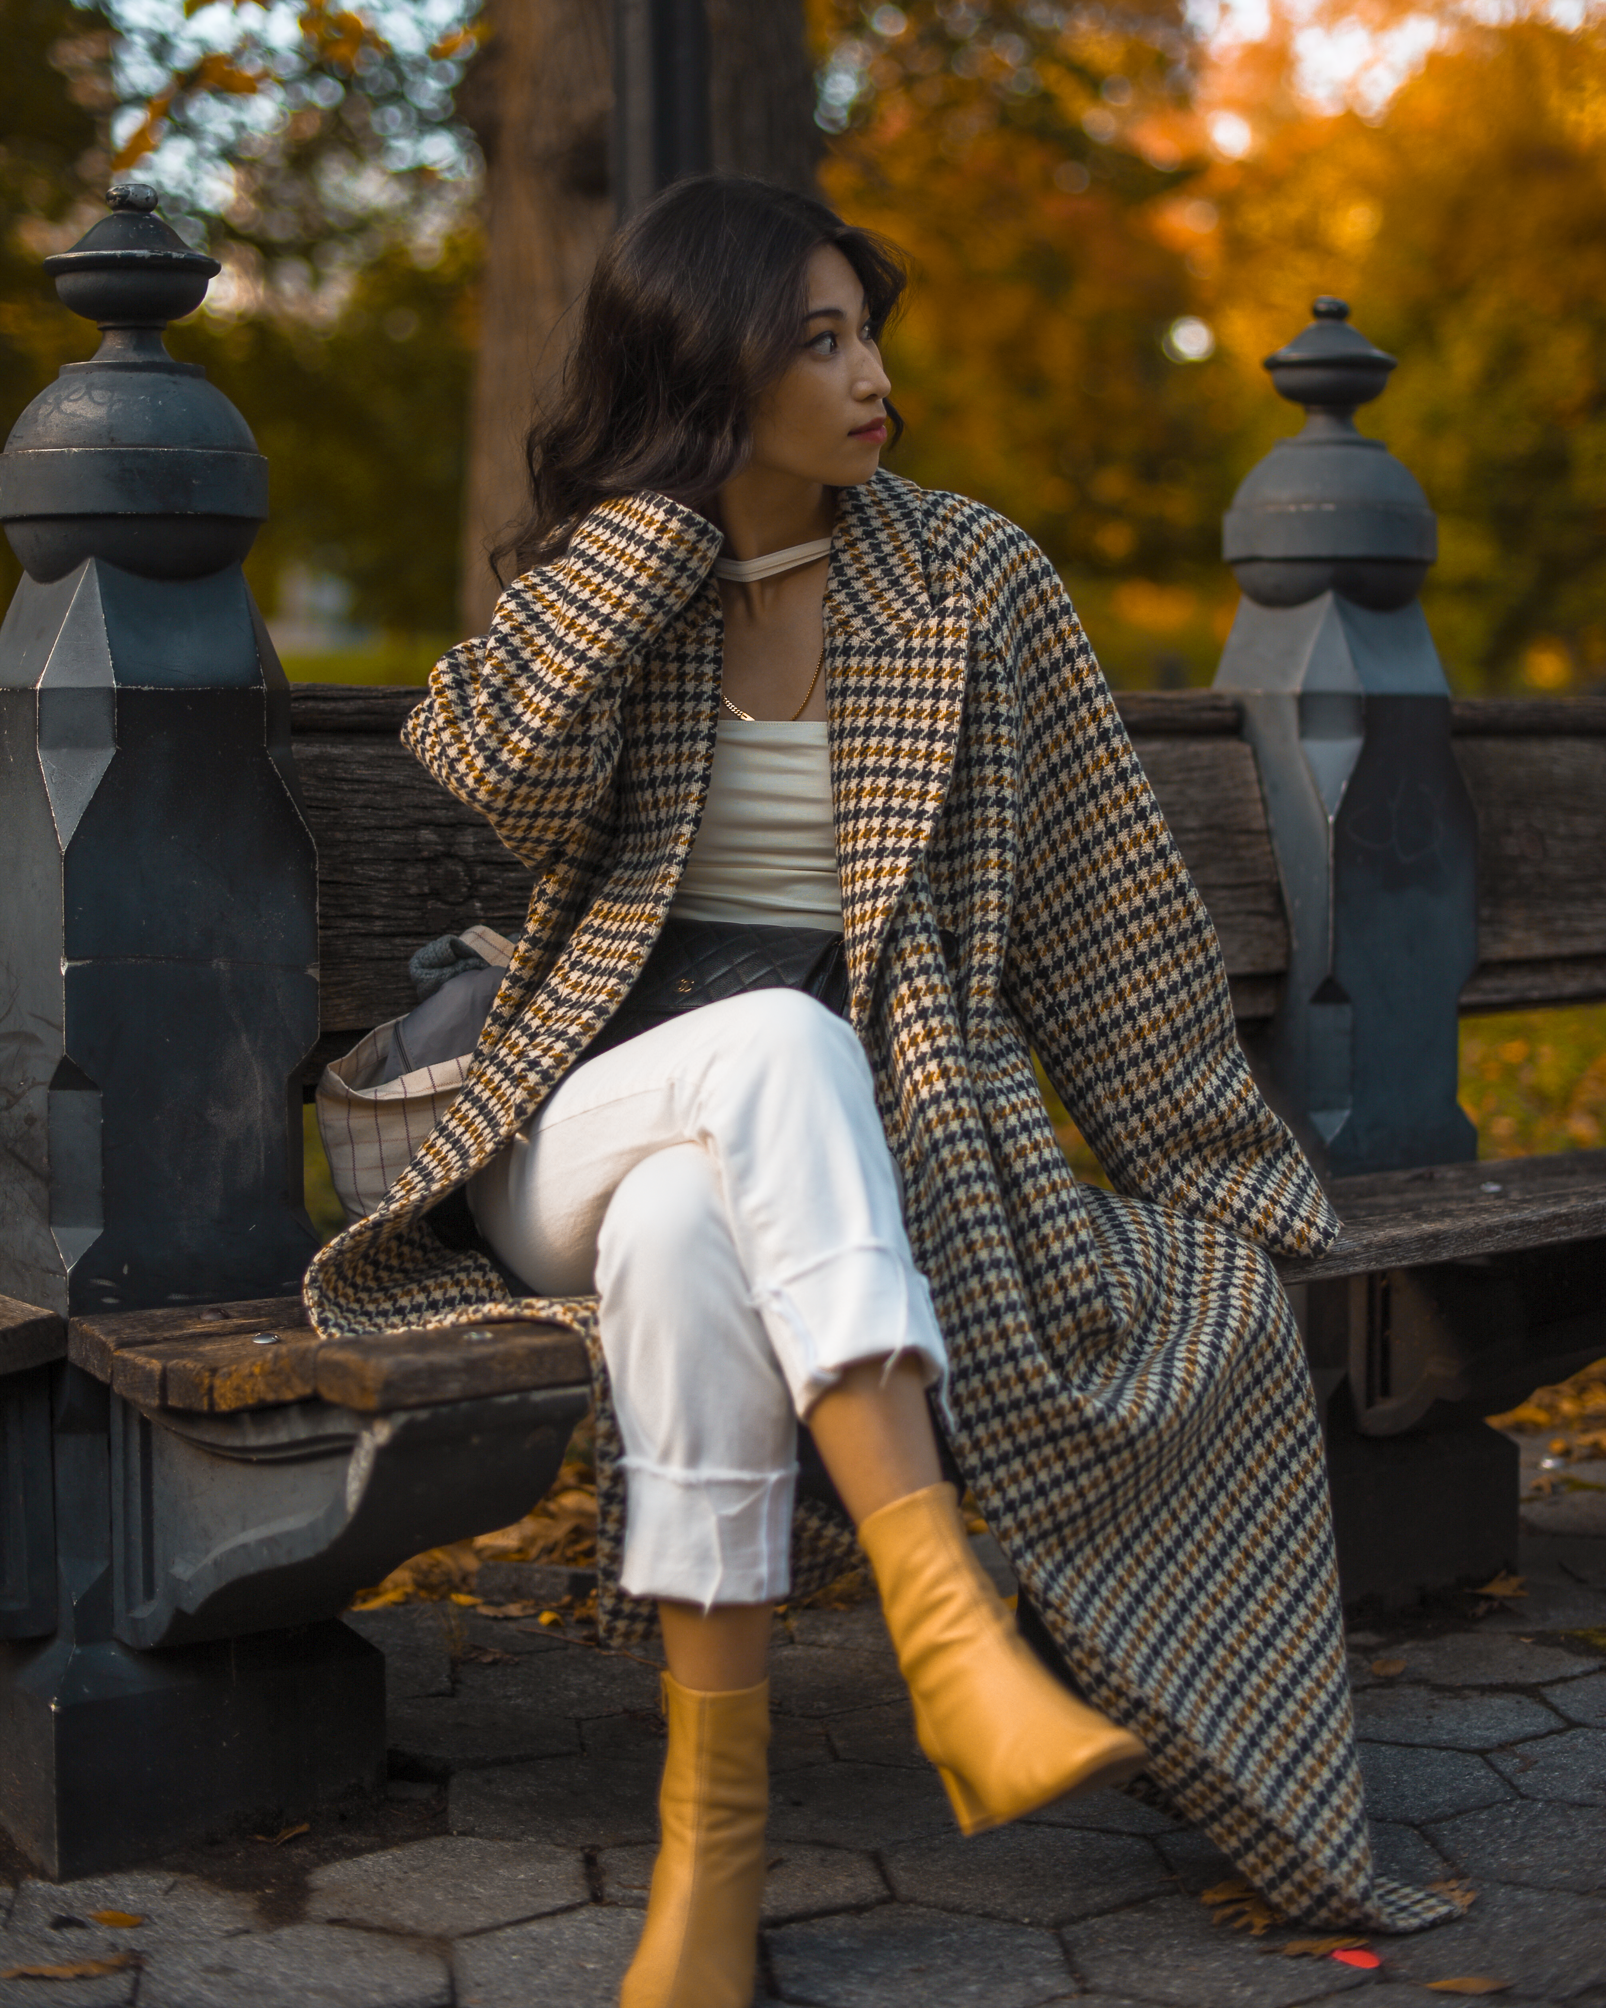 Fall plaid oversized coat, beige outfit ideas for fall, fall style in New York, Central Park fashion photo ideas, Aritzia Wilfred Prescott Wool Coat - FOREVERVANNY.com